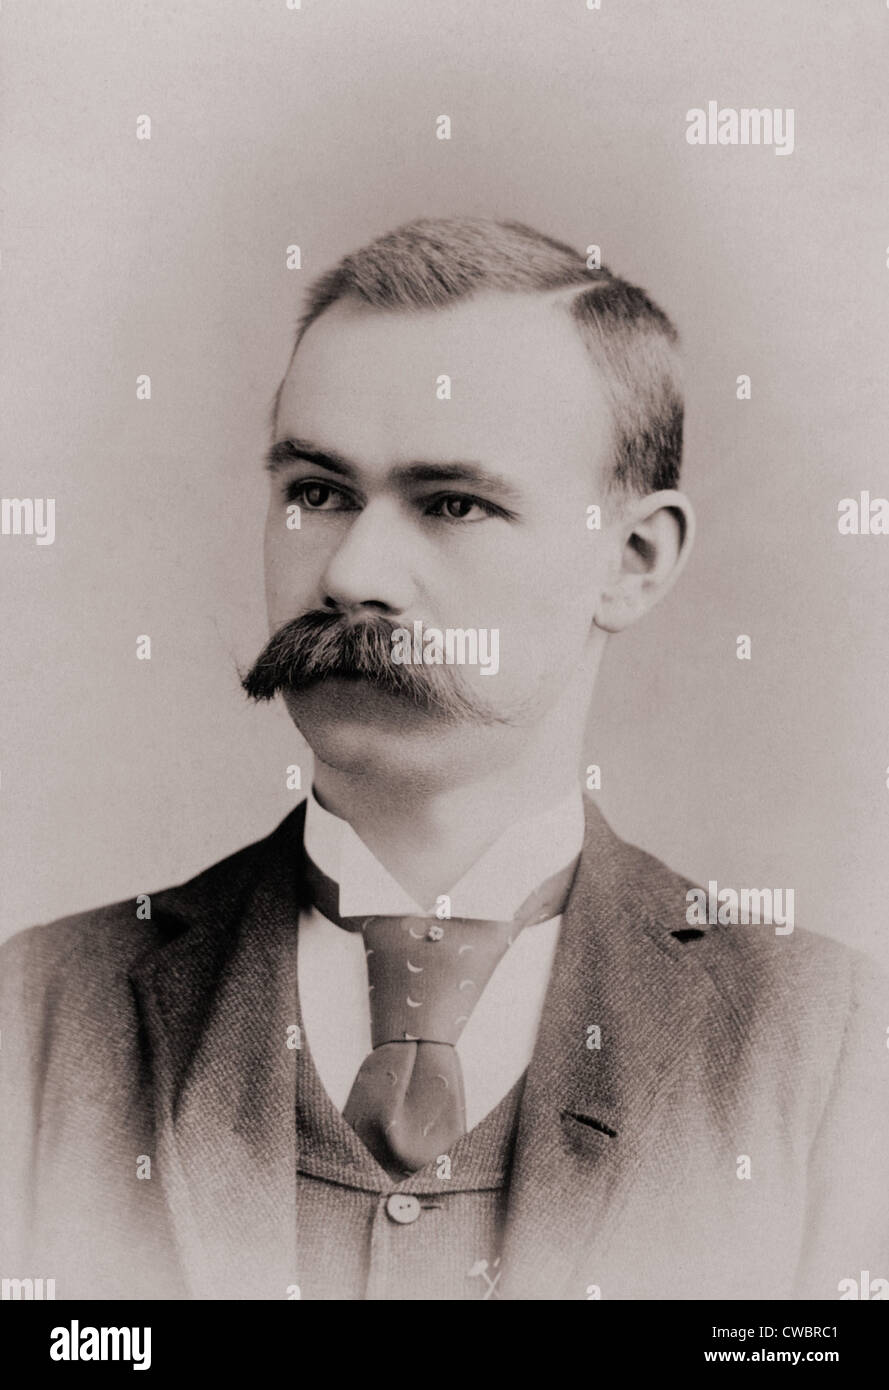 Herman Hollerith (1860-1929), American inventor of a punch card tabulating machine for automating the 1890 U.S. Census. Similar Stock Photo